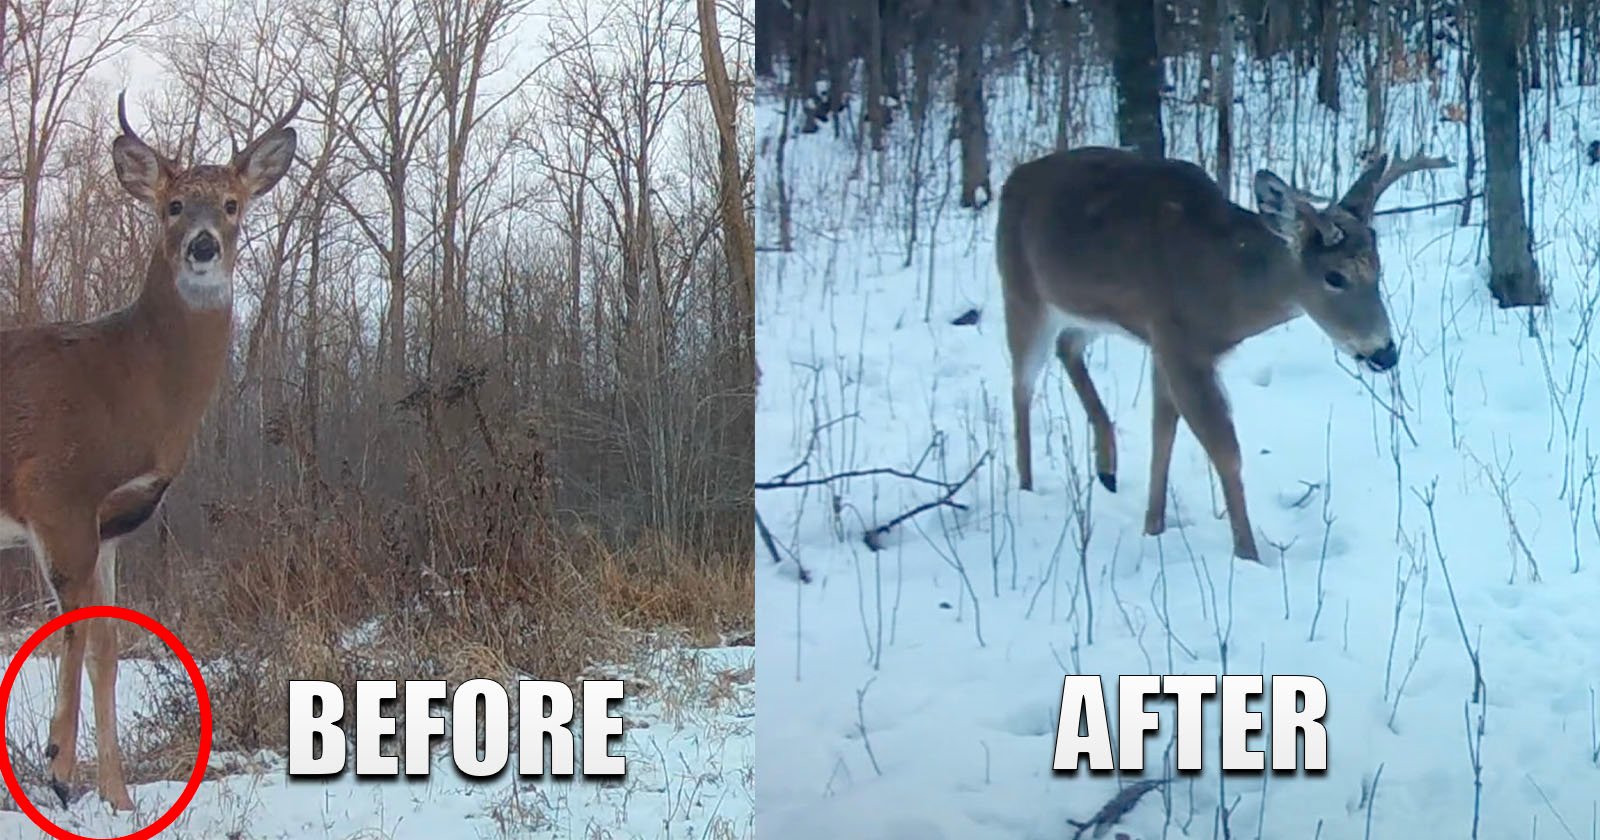 Deer Makes Miraculous Recovery From Broken Leg in Amazing Trail Cam Footage